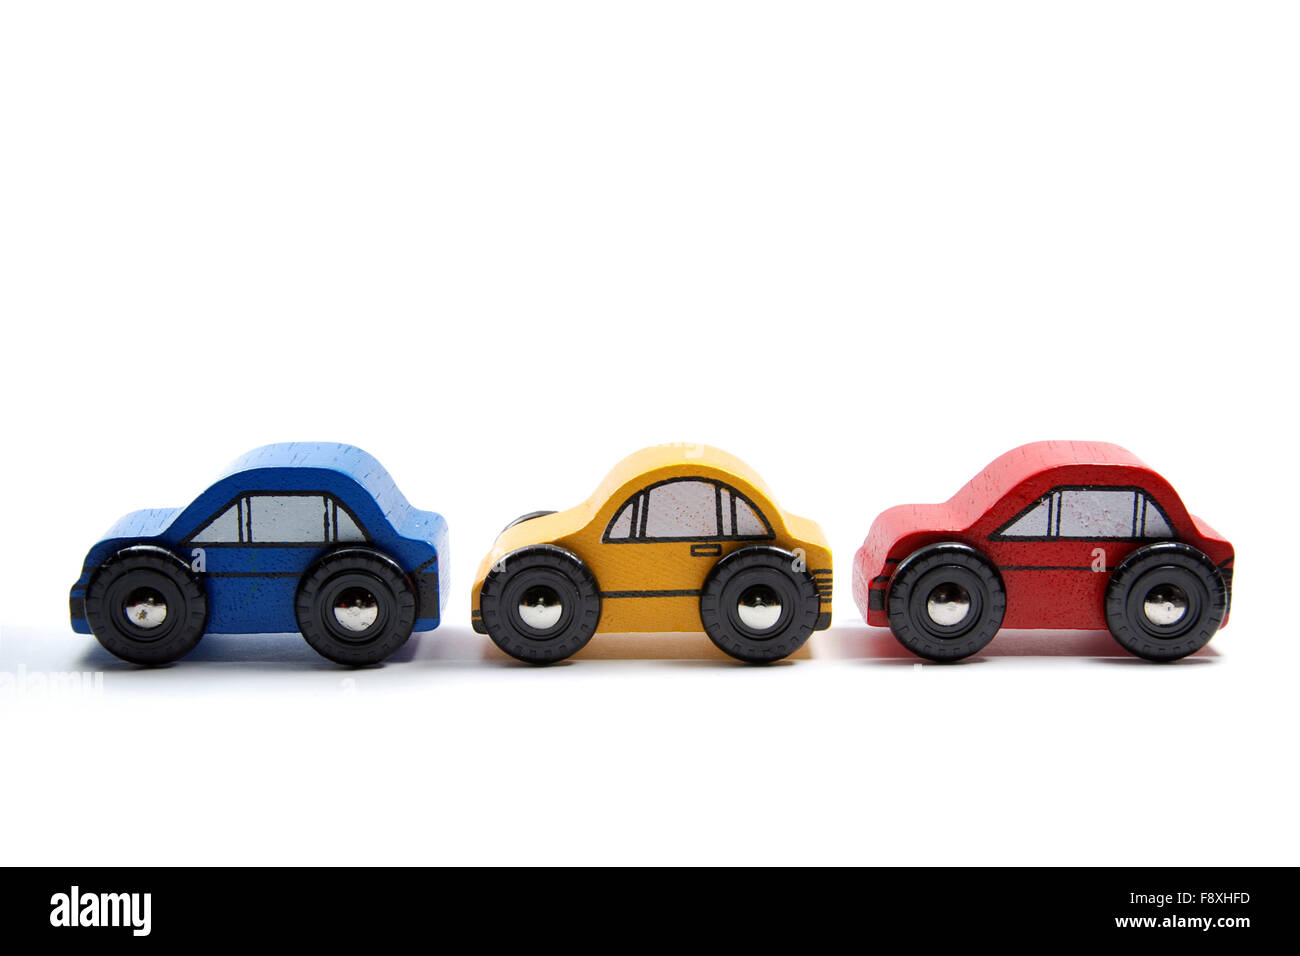 Three wooden toy cars in a row Stock Photo